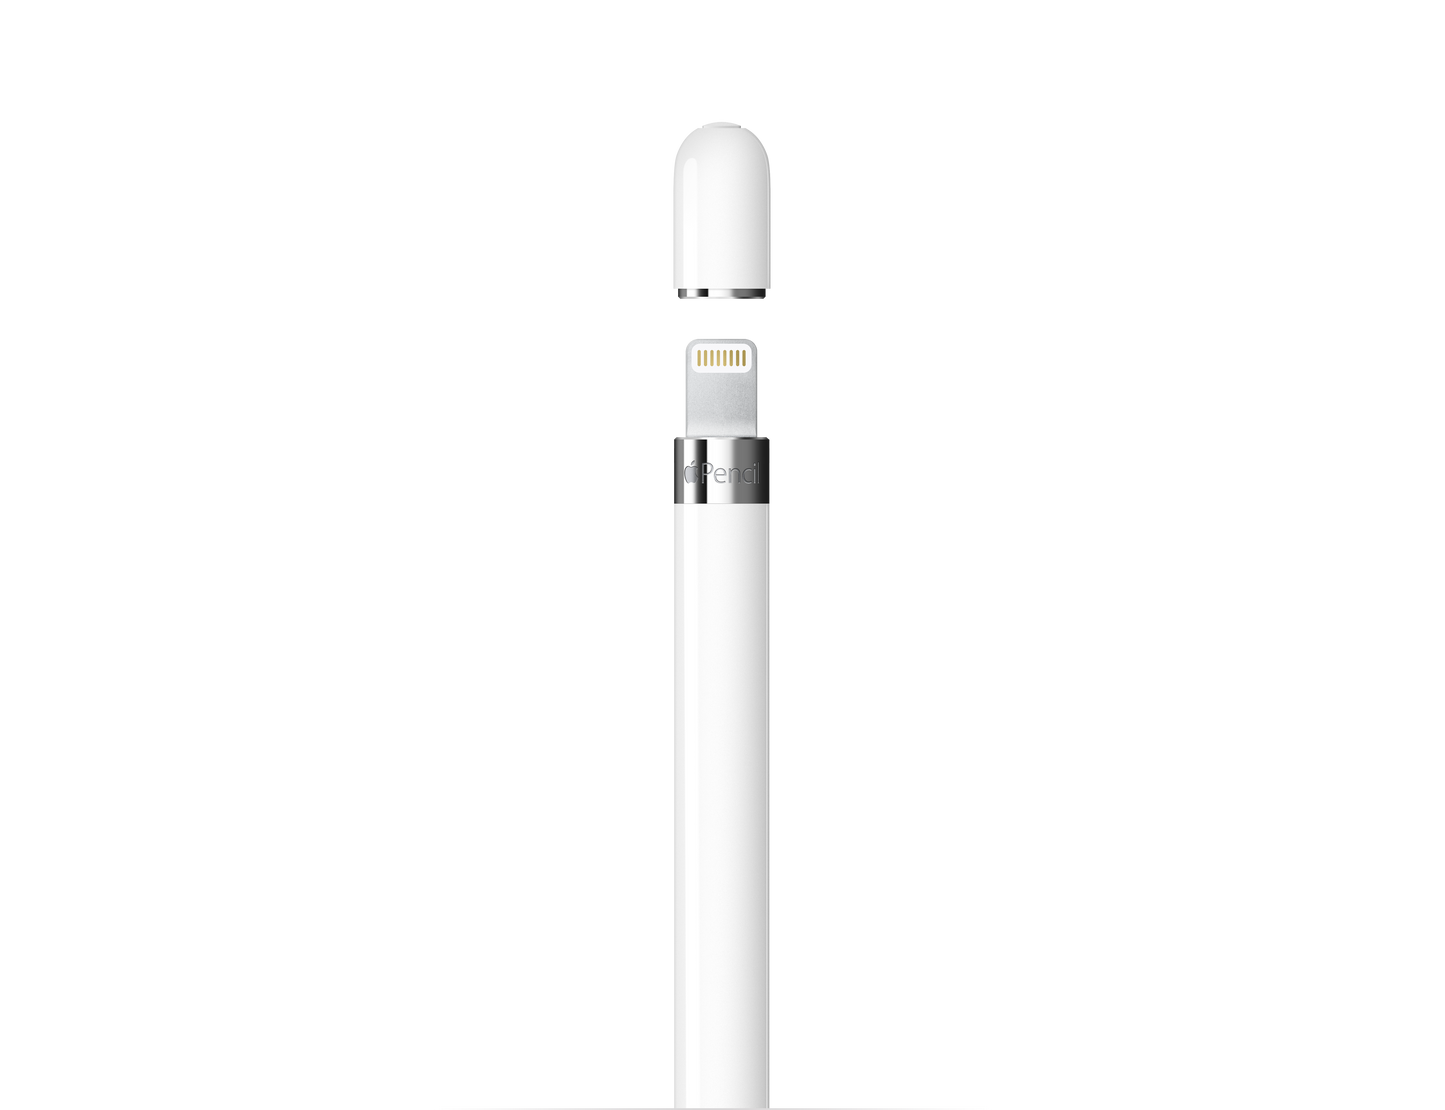 Apple Pencil (1st generation) - Includes USB-C to Apple Pencil Adapter